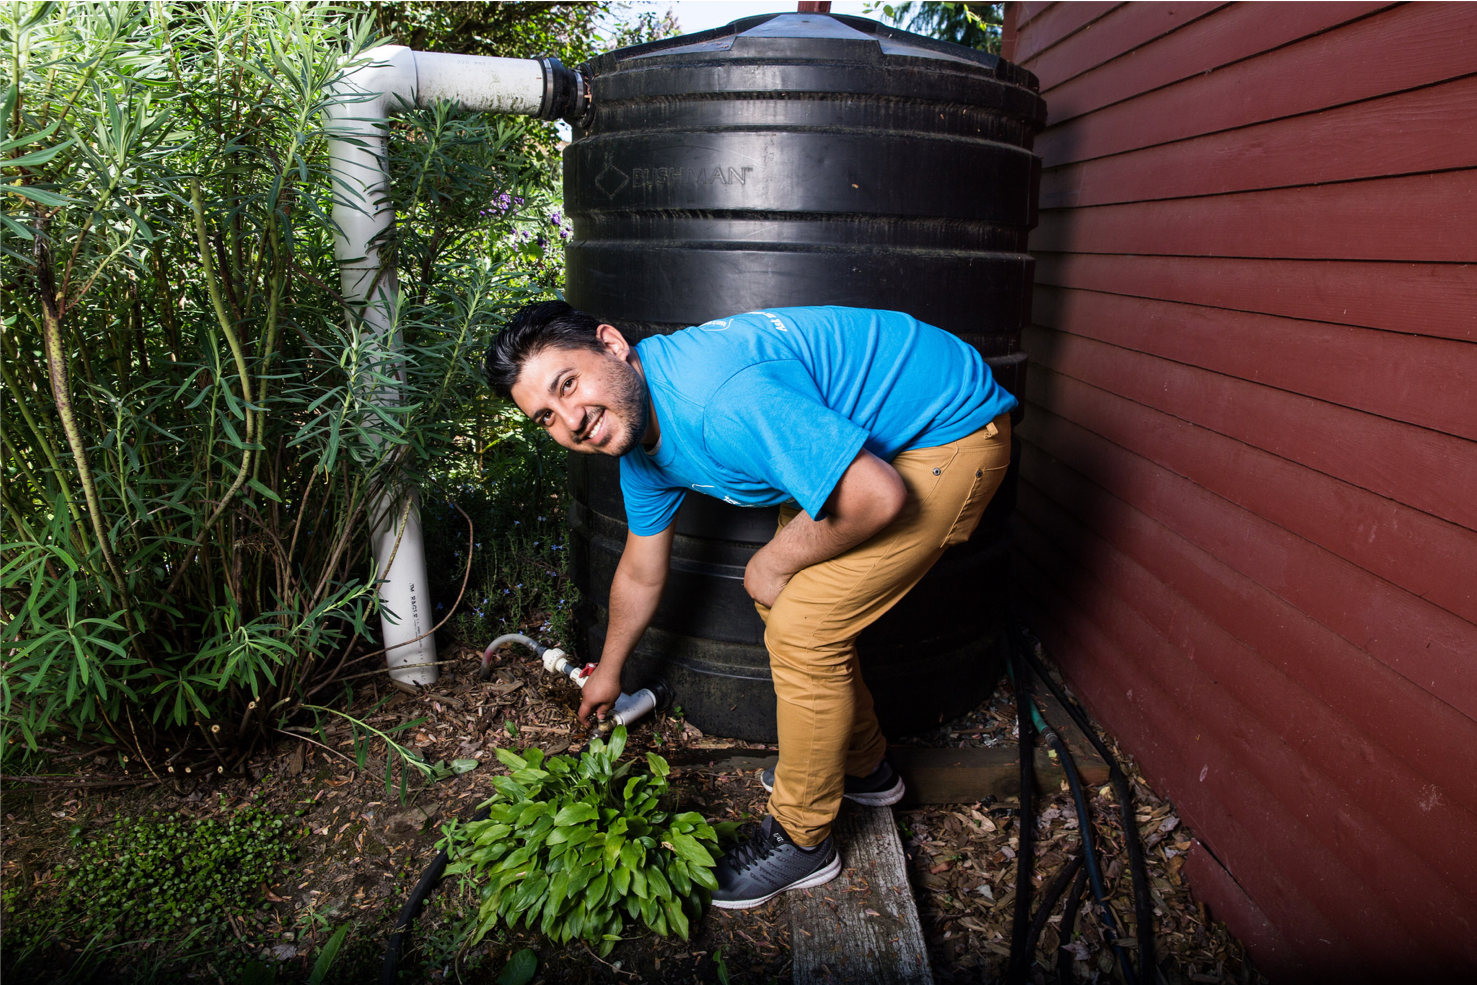 A man in a blue T-shirt checks a valve on a large black water cistern by the side of a red house.